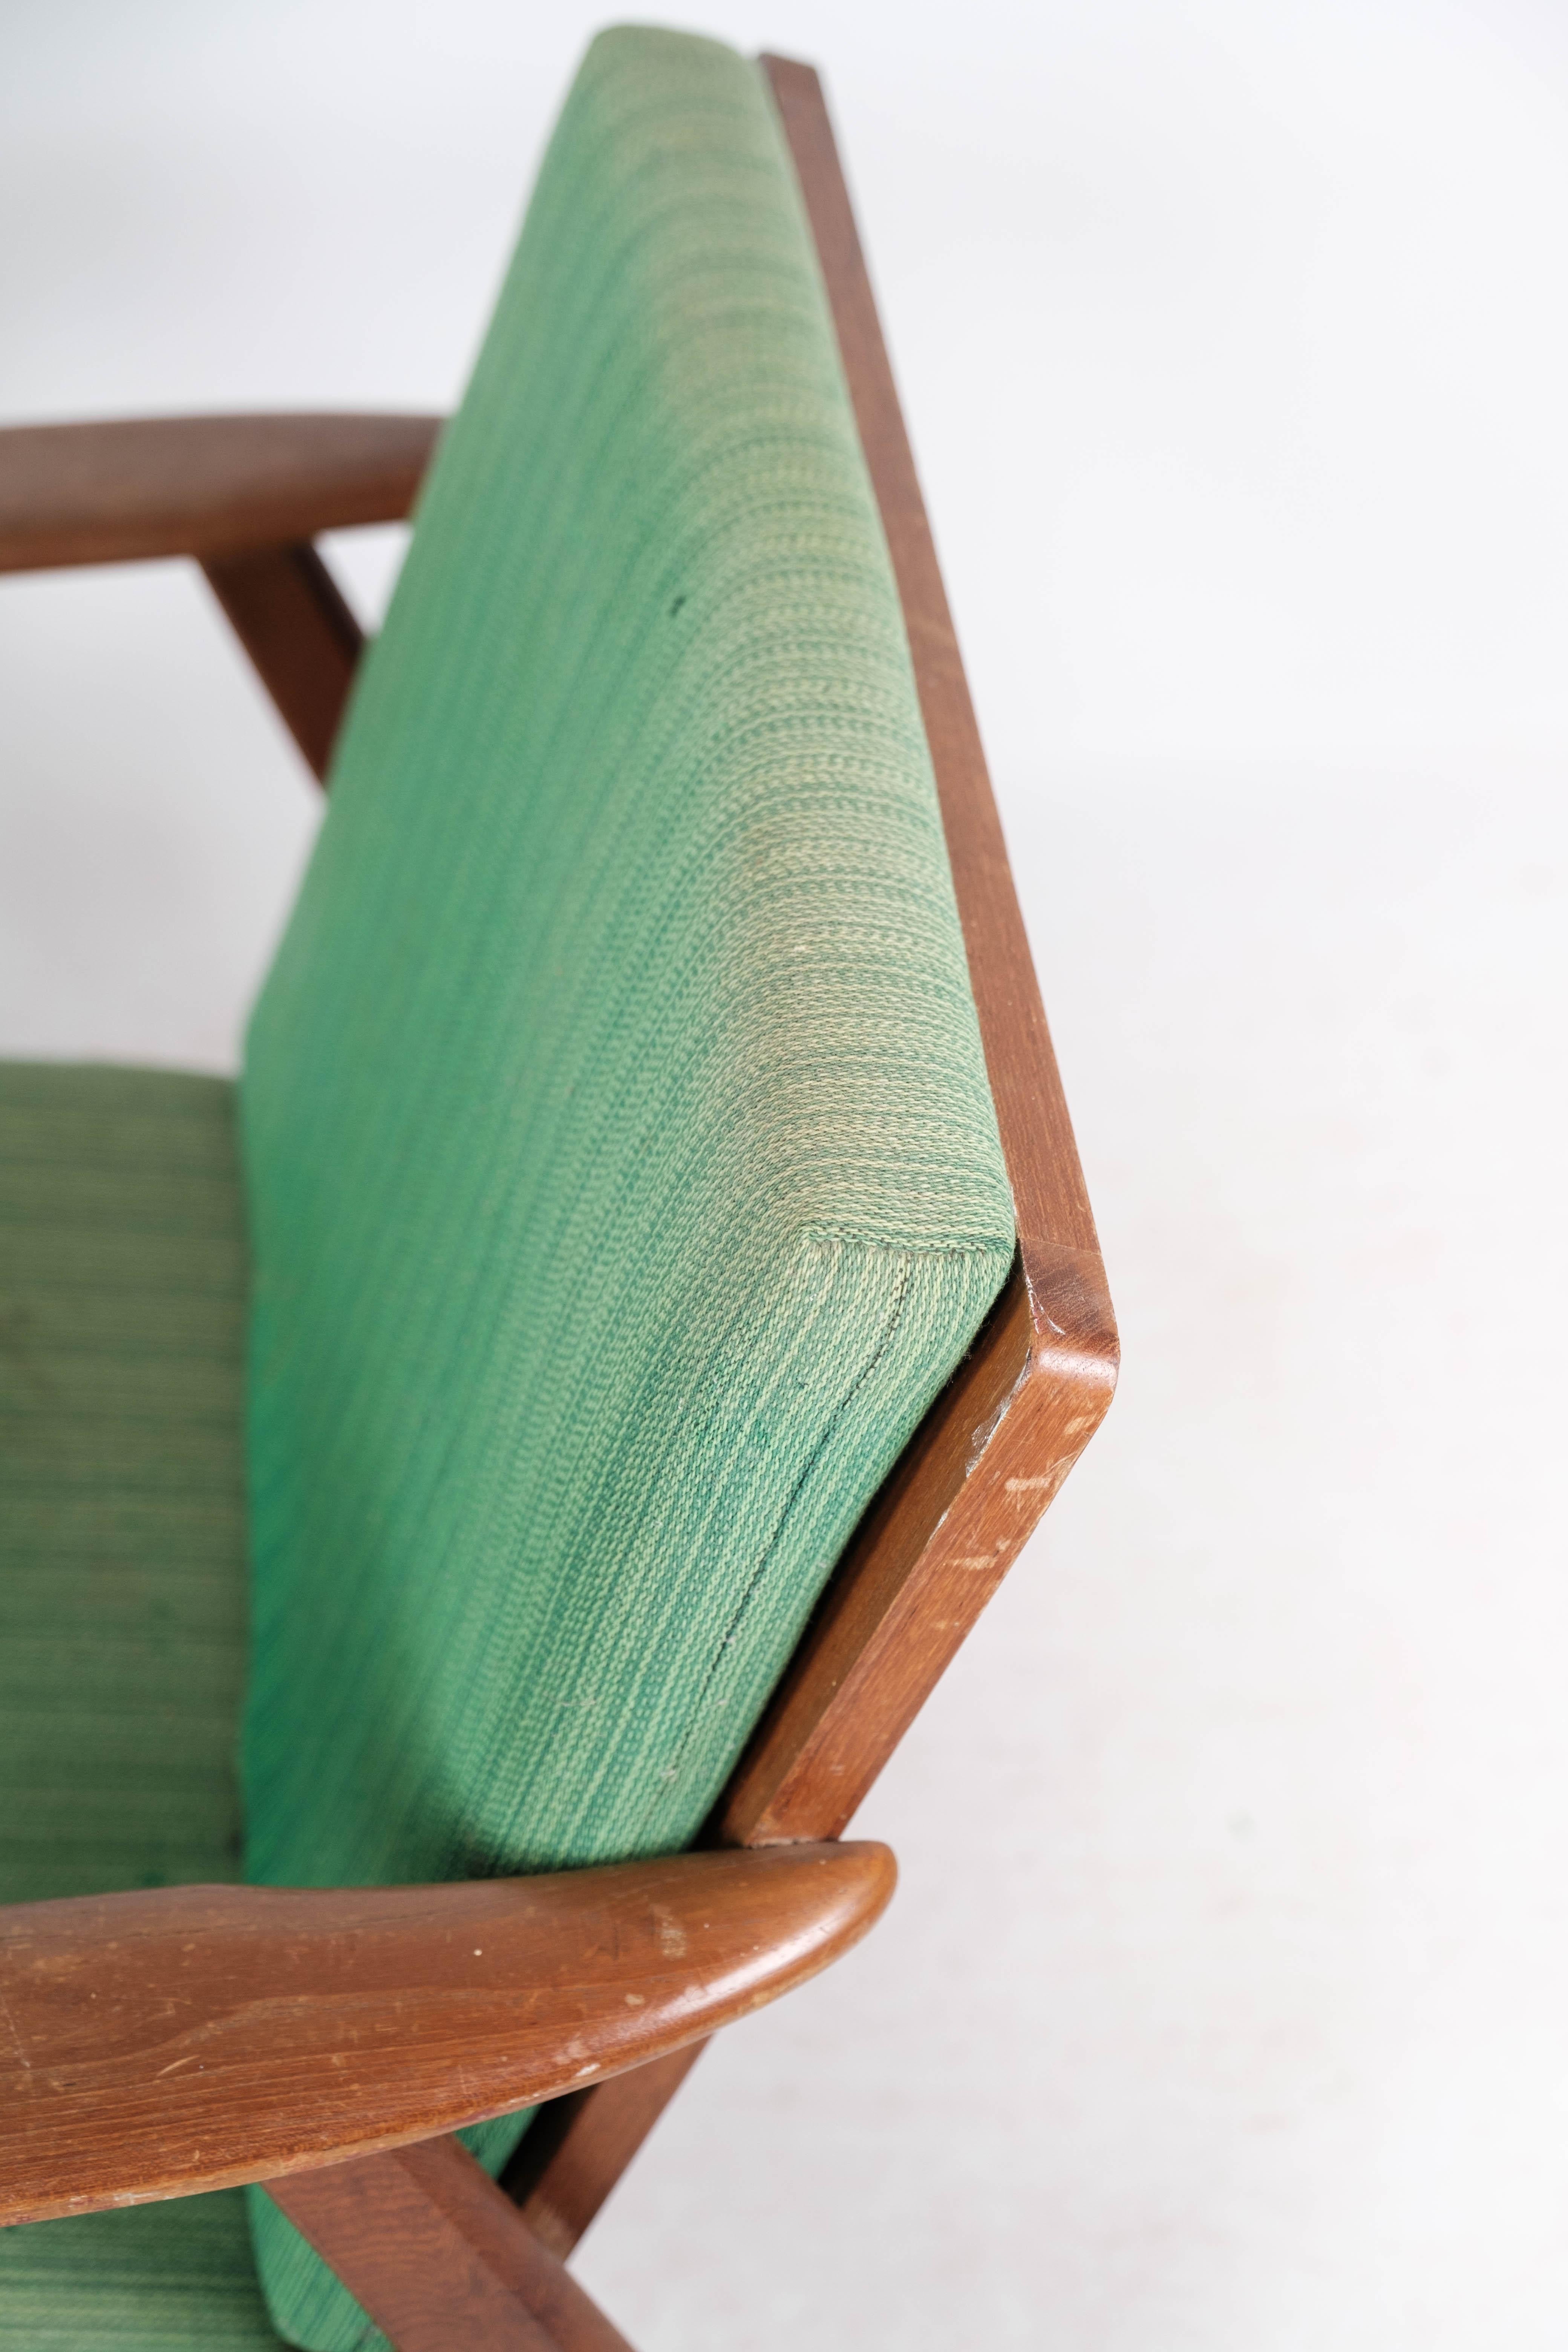 Scandinavian Modern Easy Chair in Teak and with Green Upholstery of Danish Design from the 1960s For Sale